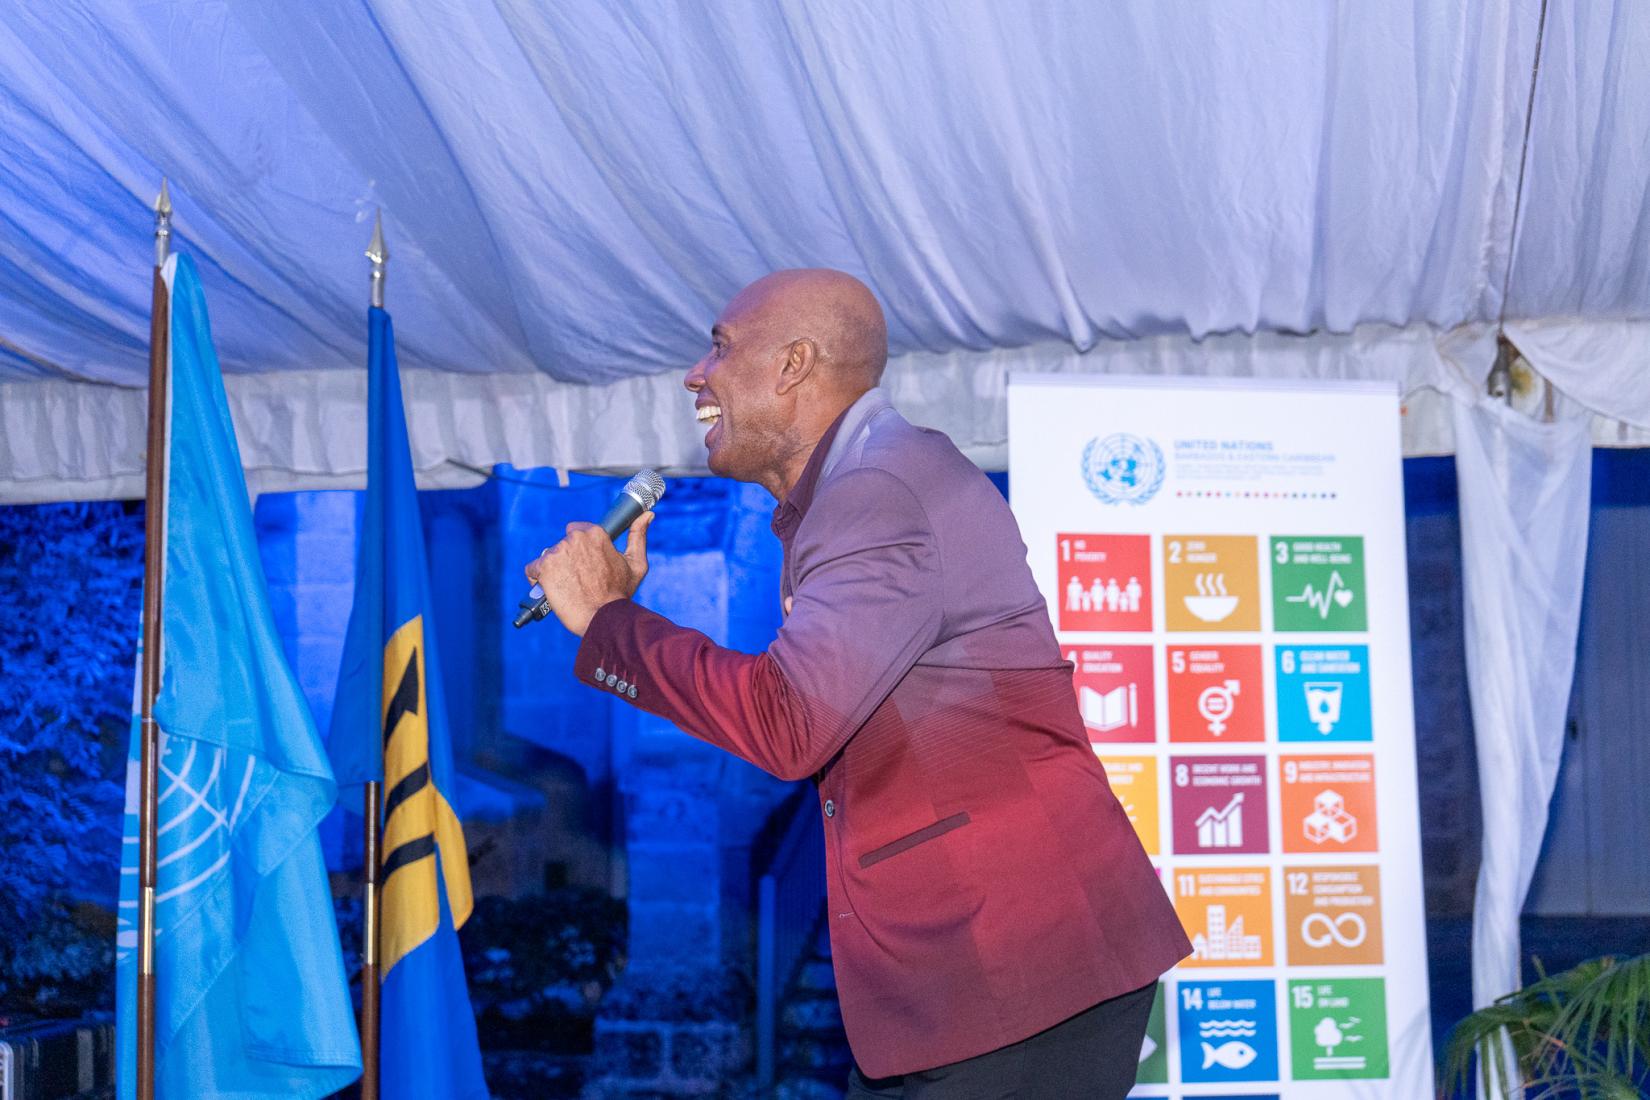 Man stands on stage in blazer with microphone behind him with the UN Flag, Barbados Flag, and standing banner of the 17 SDGs behind him